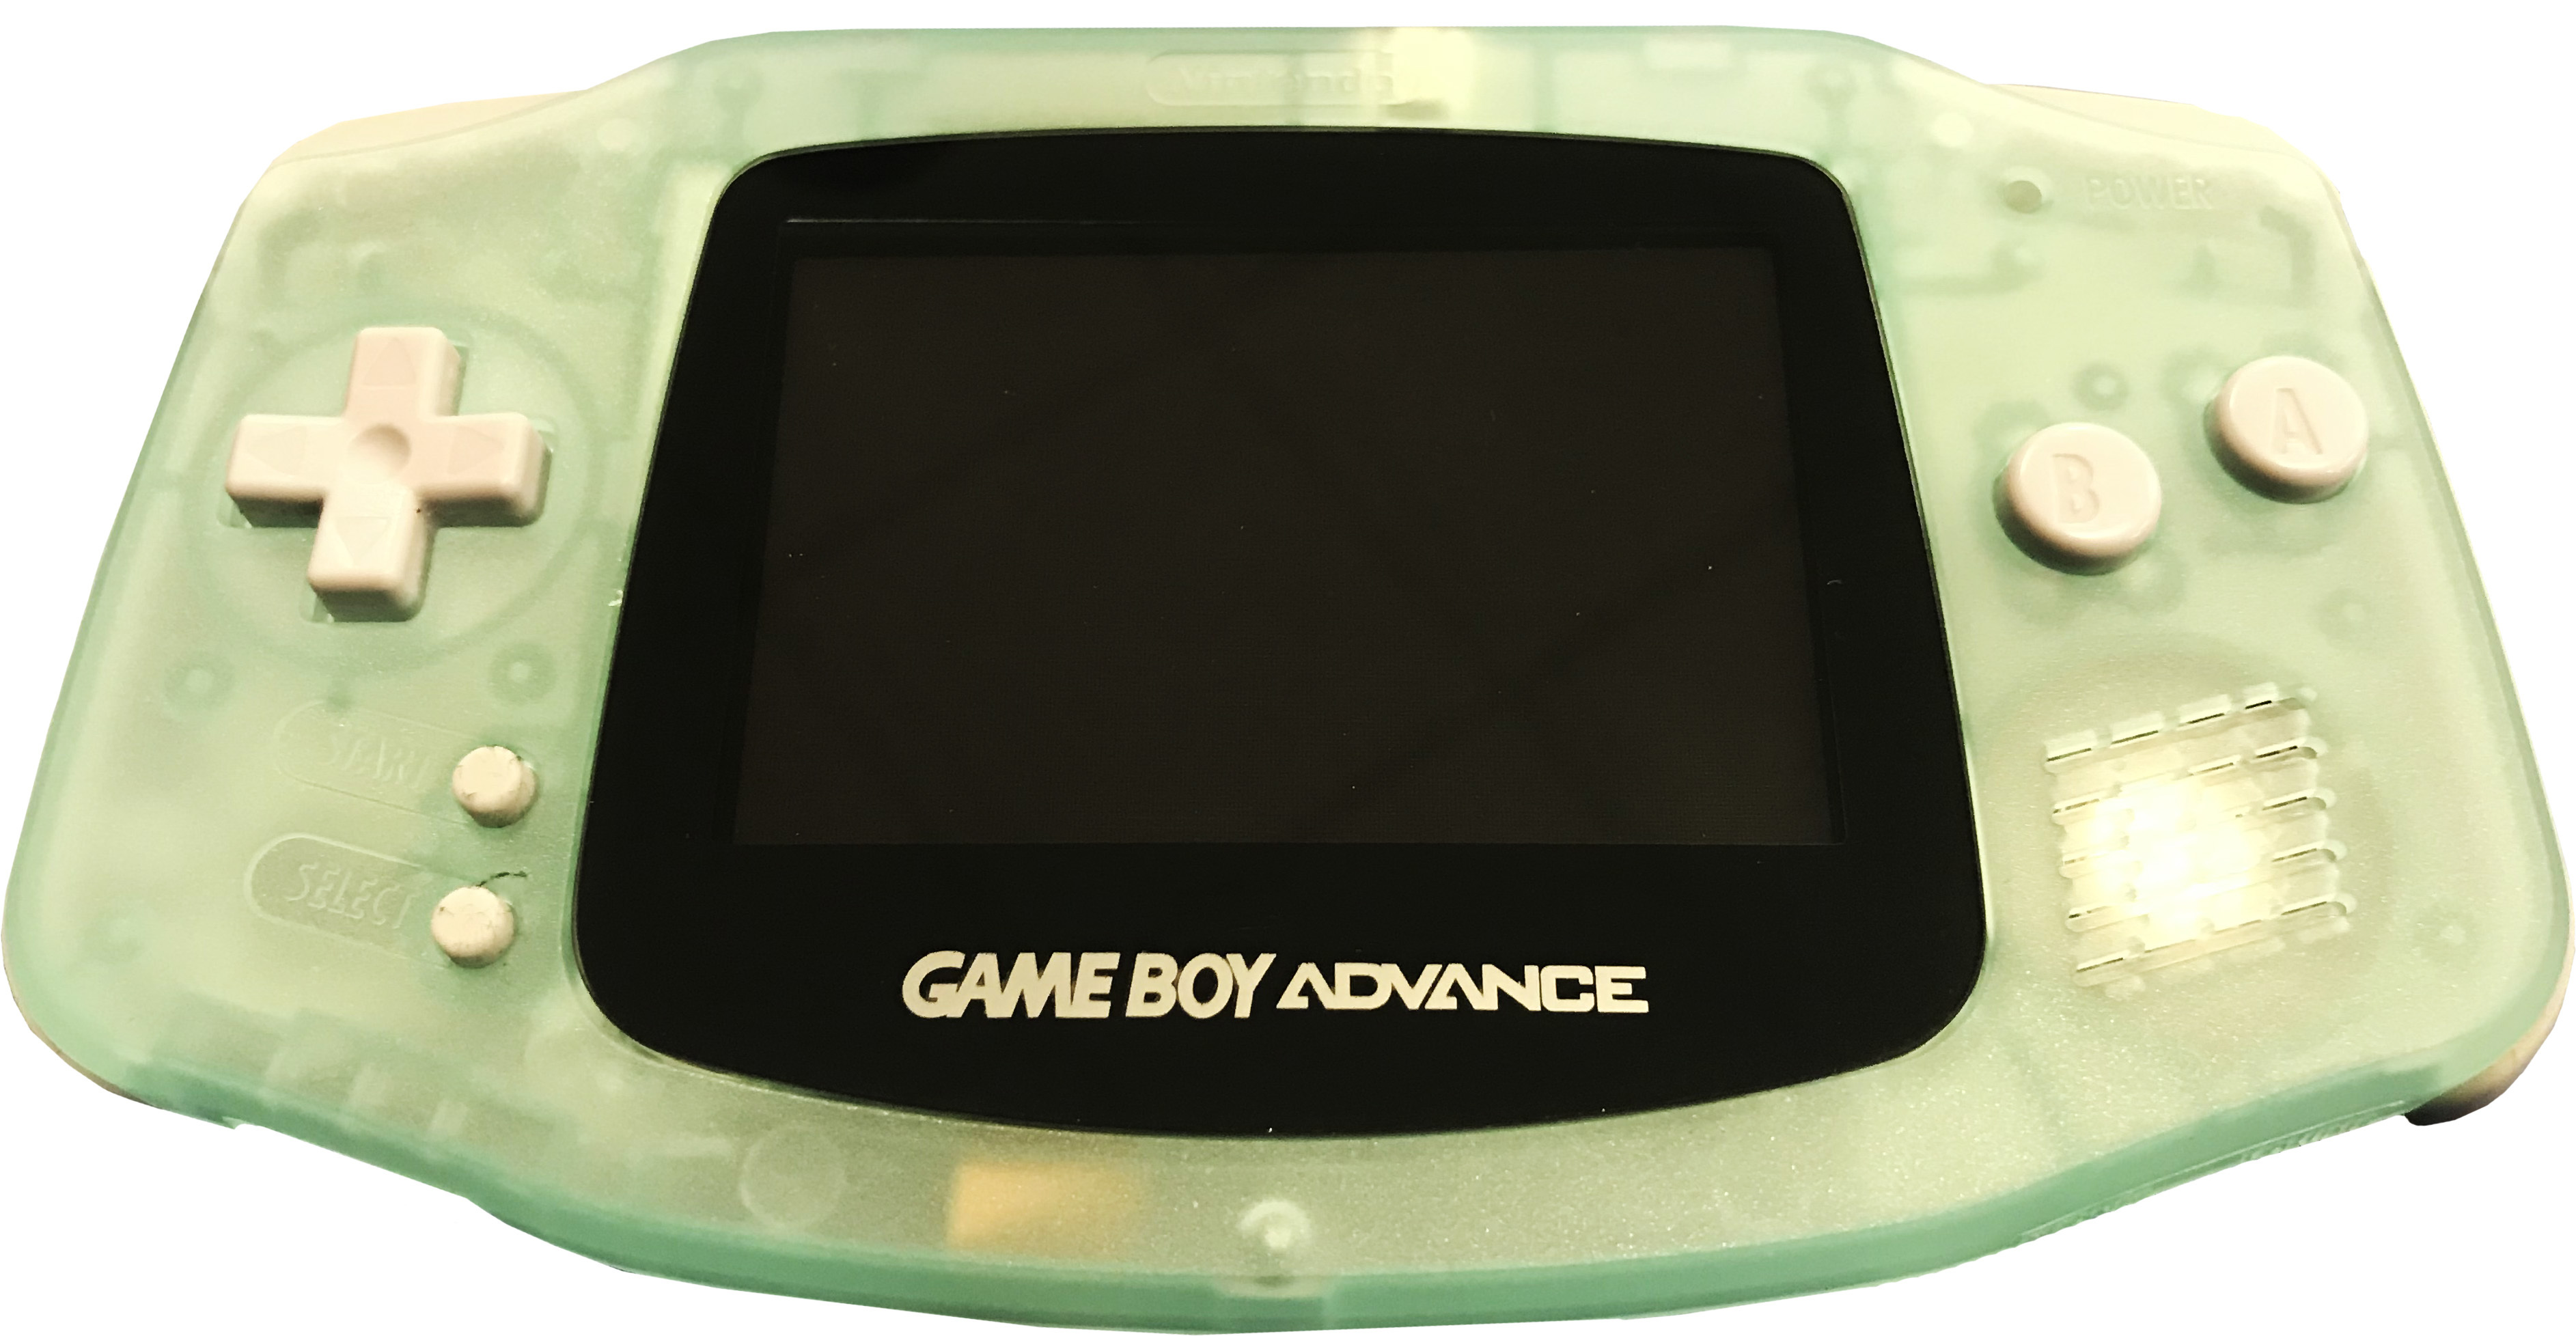 Modded Gameboy Advance Console